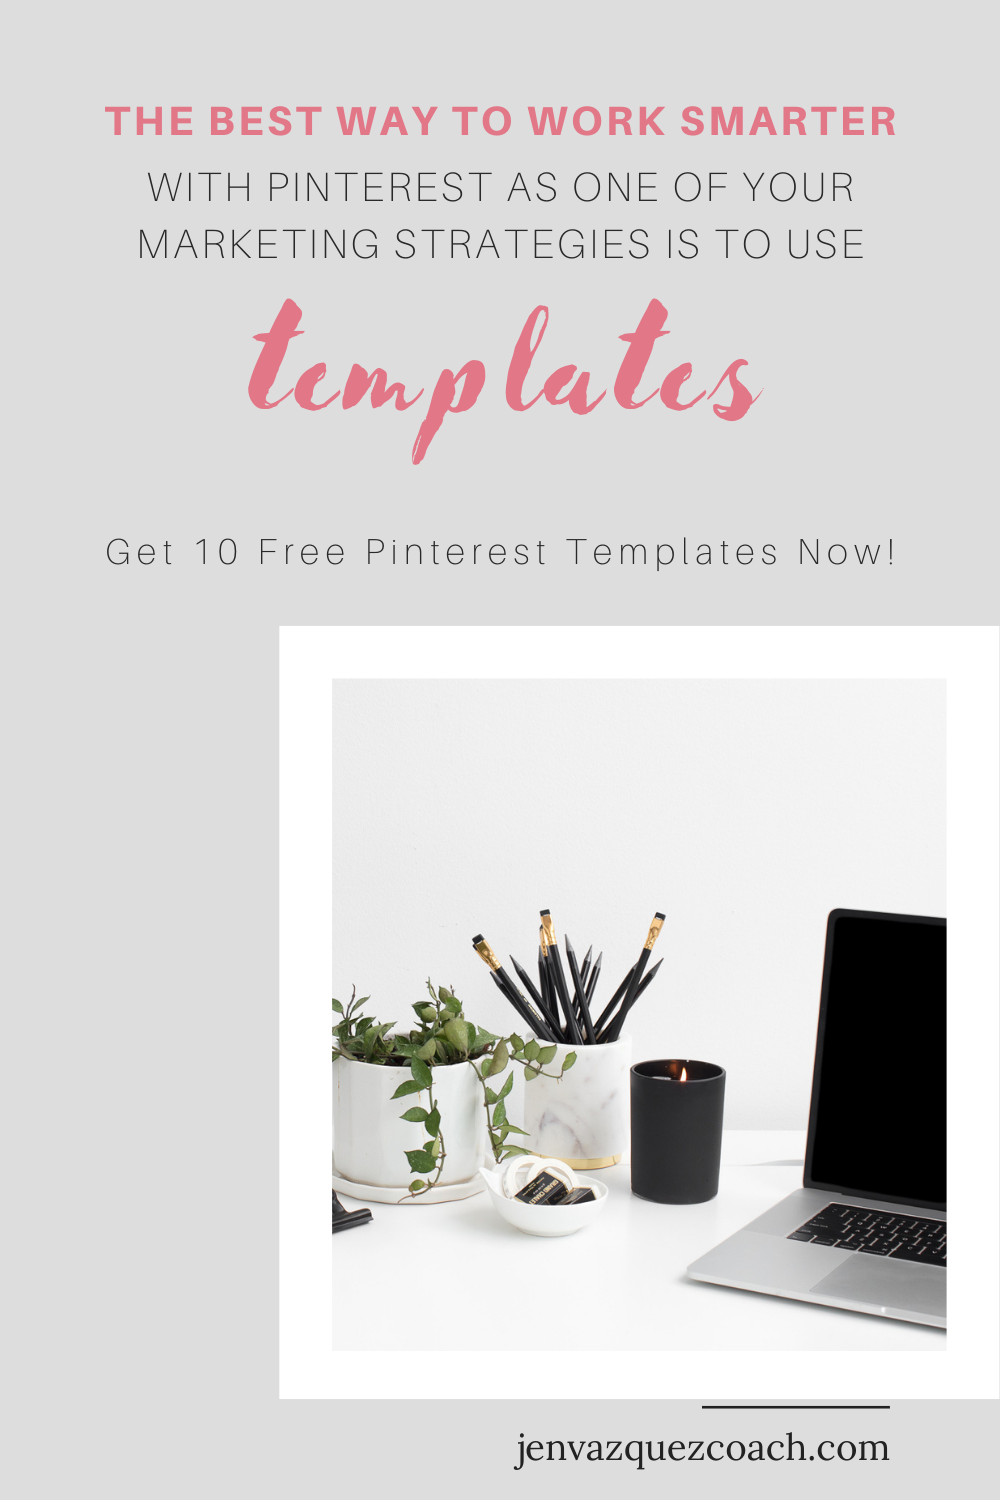 10 Free Pin Templates by Jen Vazquez Marketing Strategist  - Click to download them now